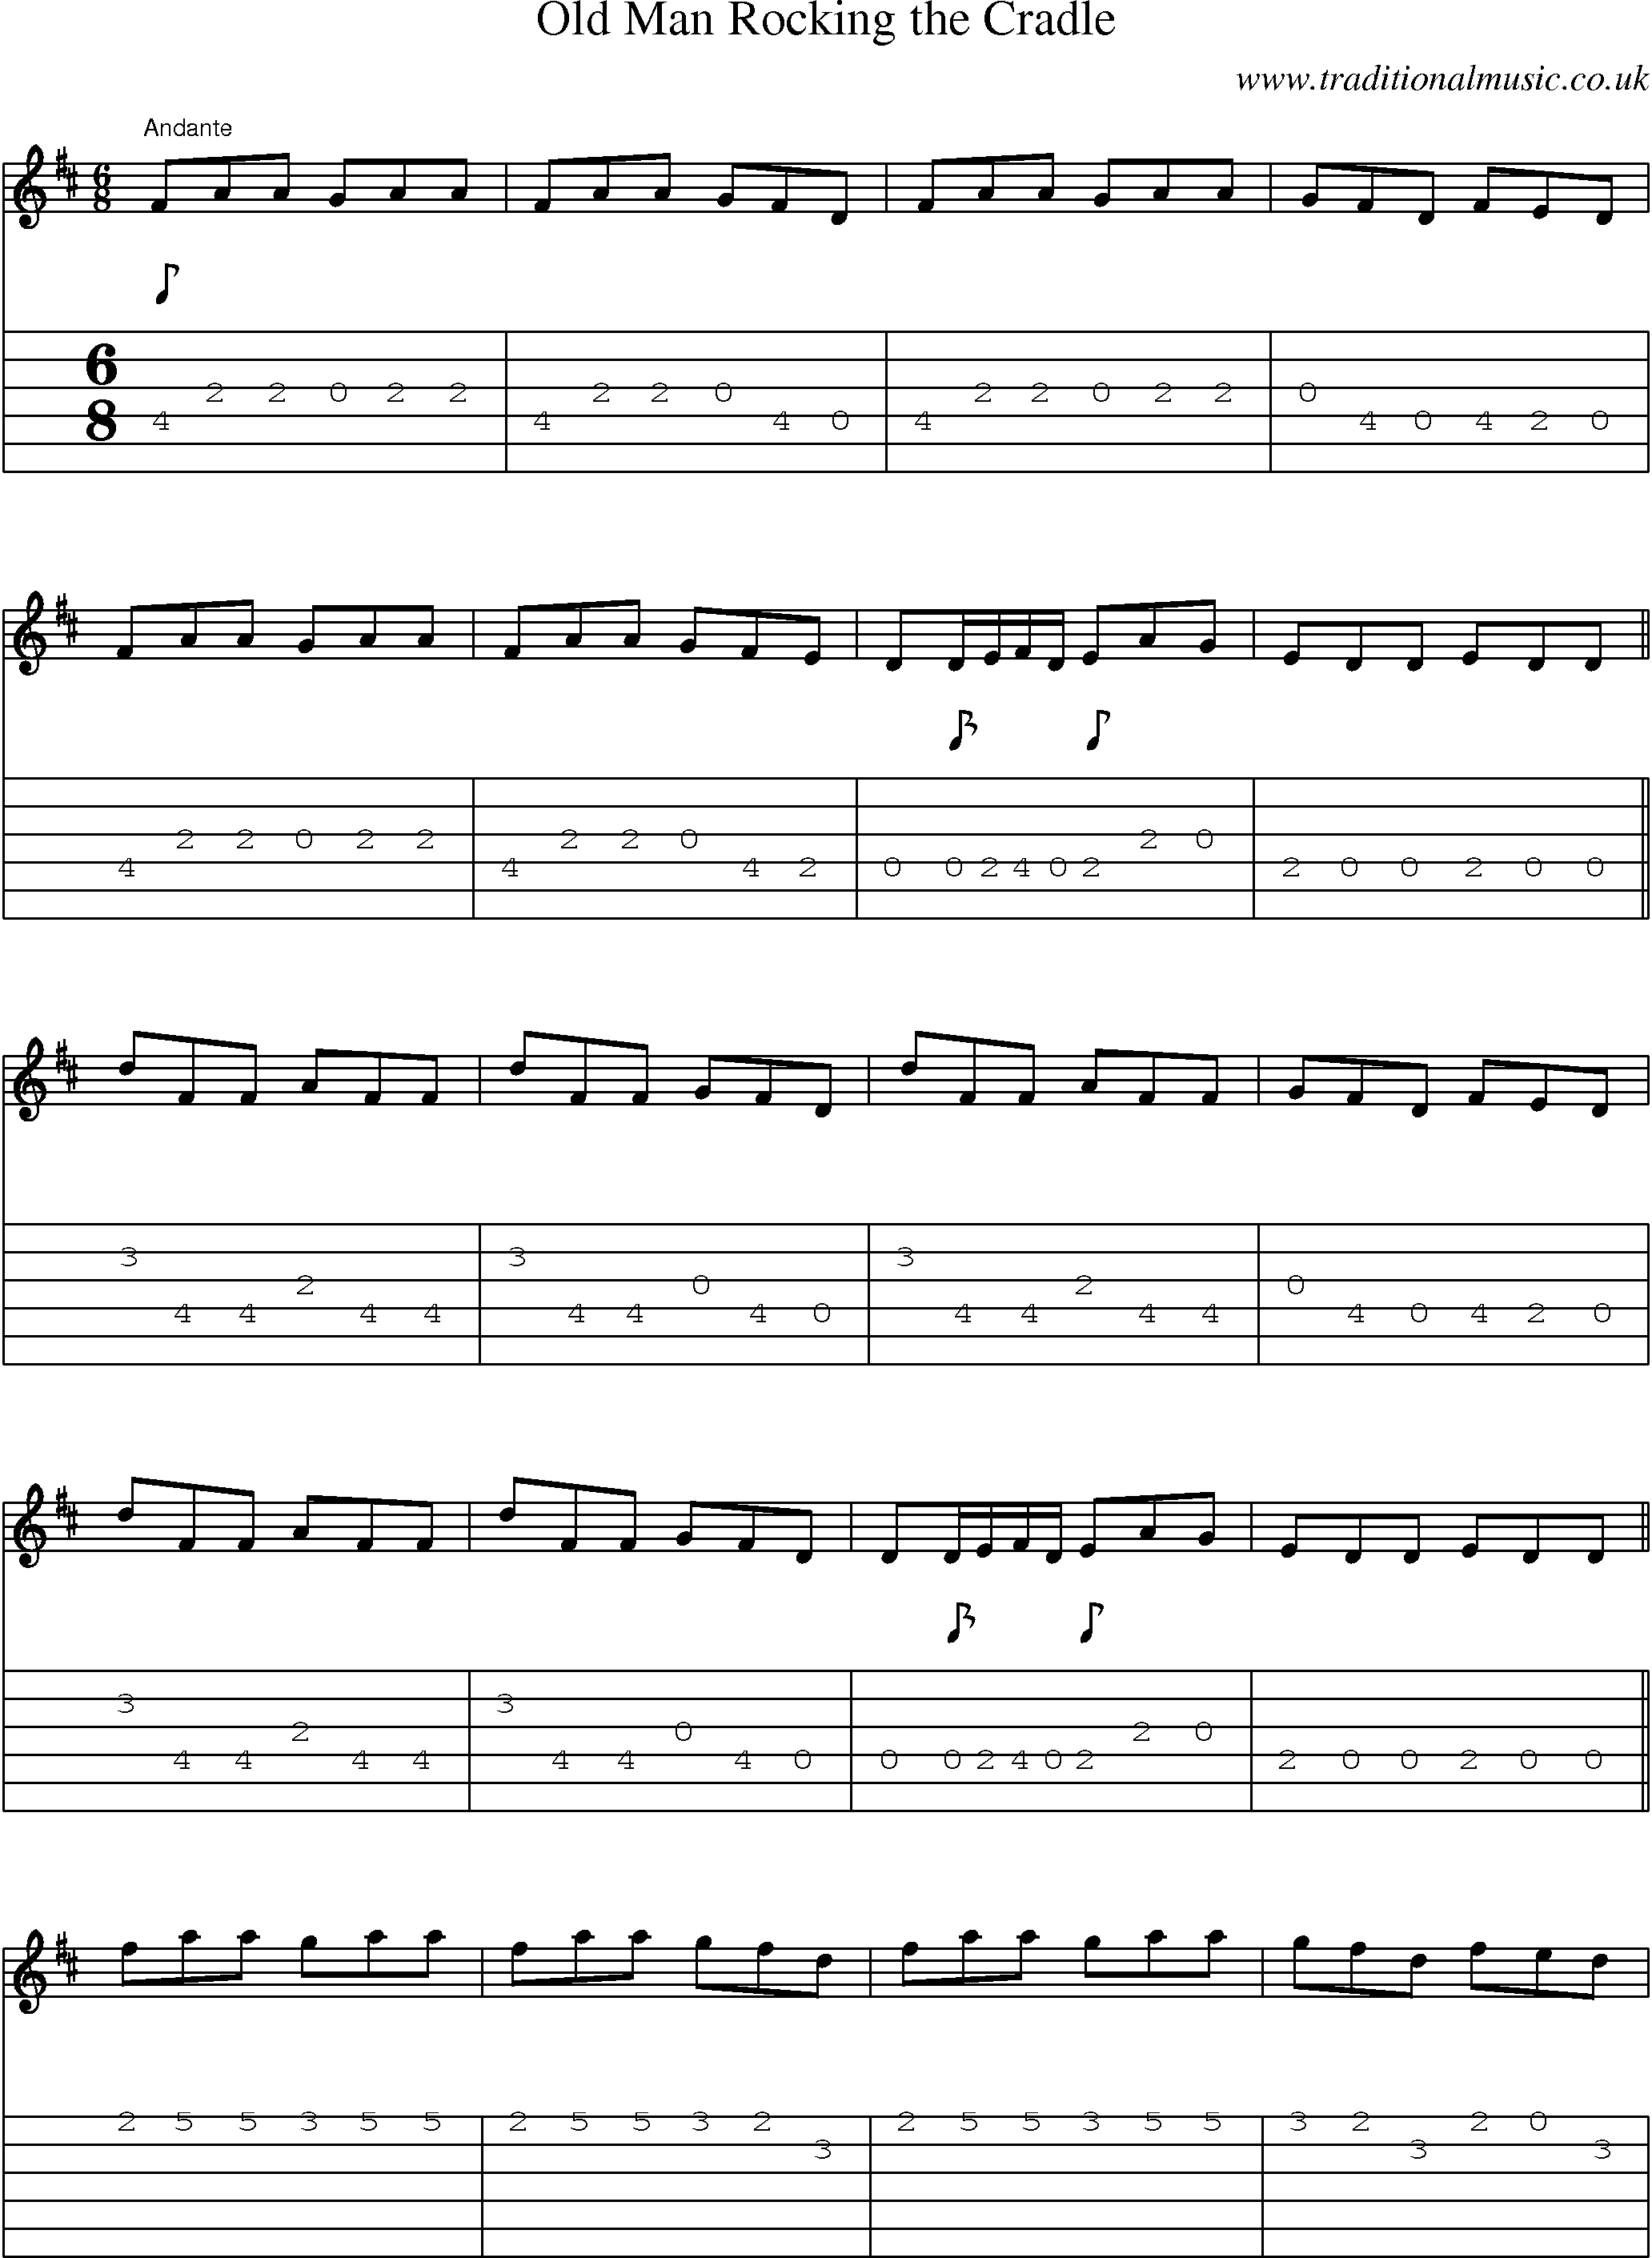 Music Score and Guitar Tabs for Old Man Rocking Cradle